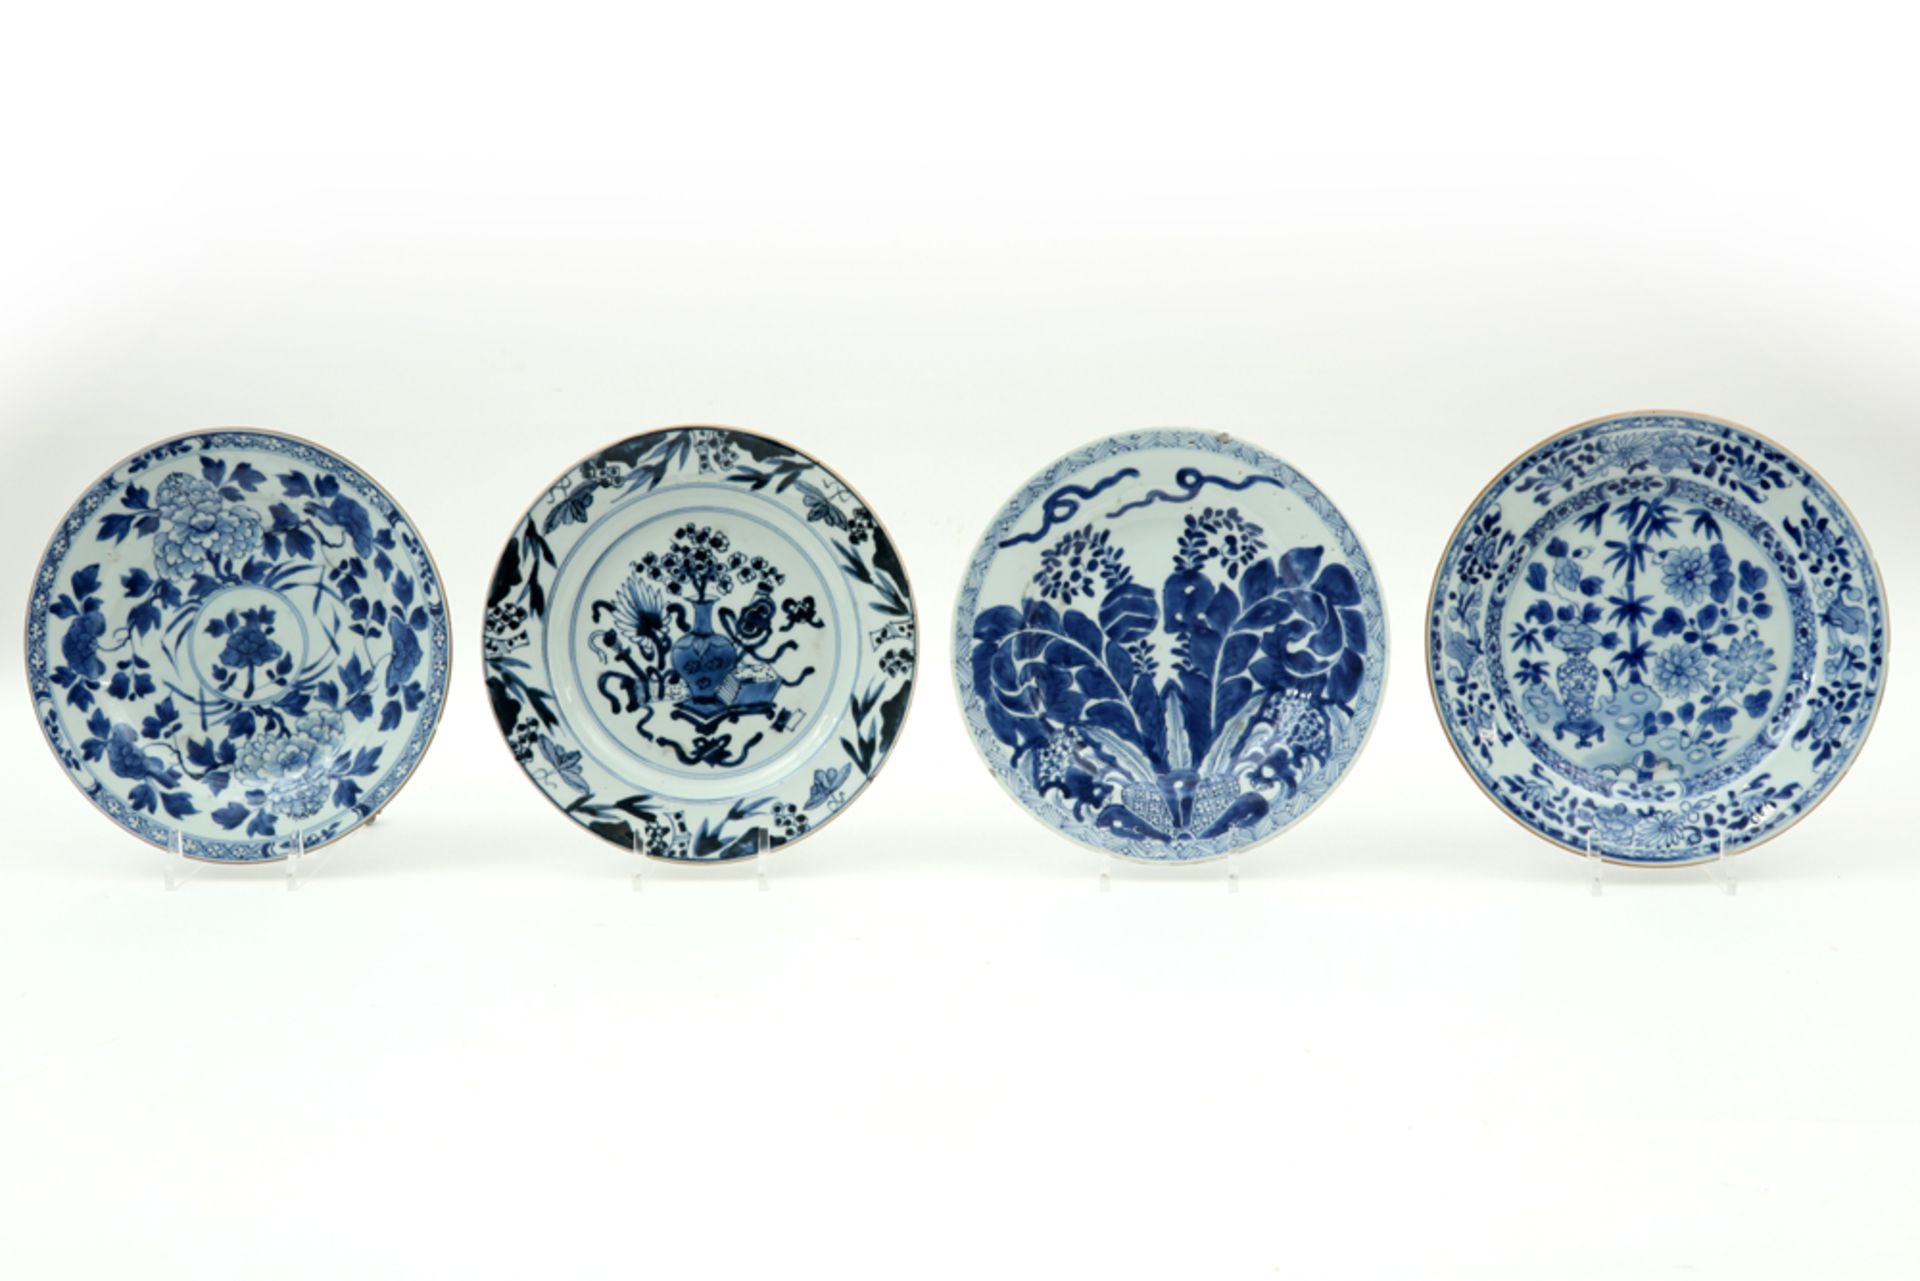 four 18th Cent. Chinese plates in porcelain with a blue-white decor || Lot van vier achttiende